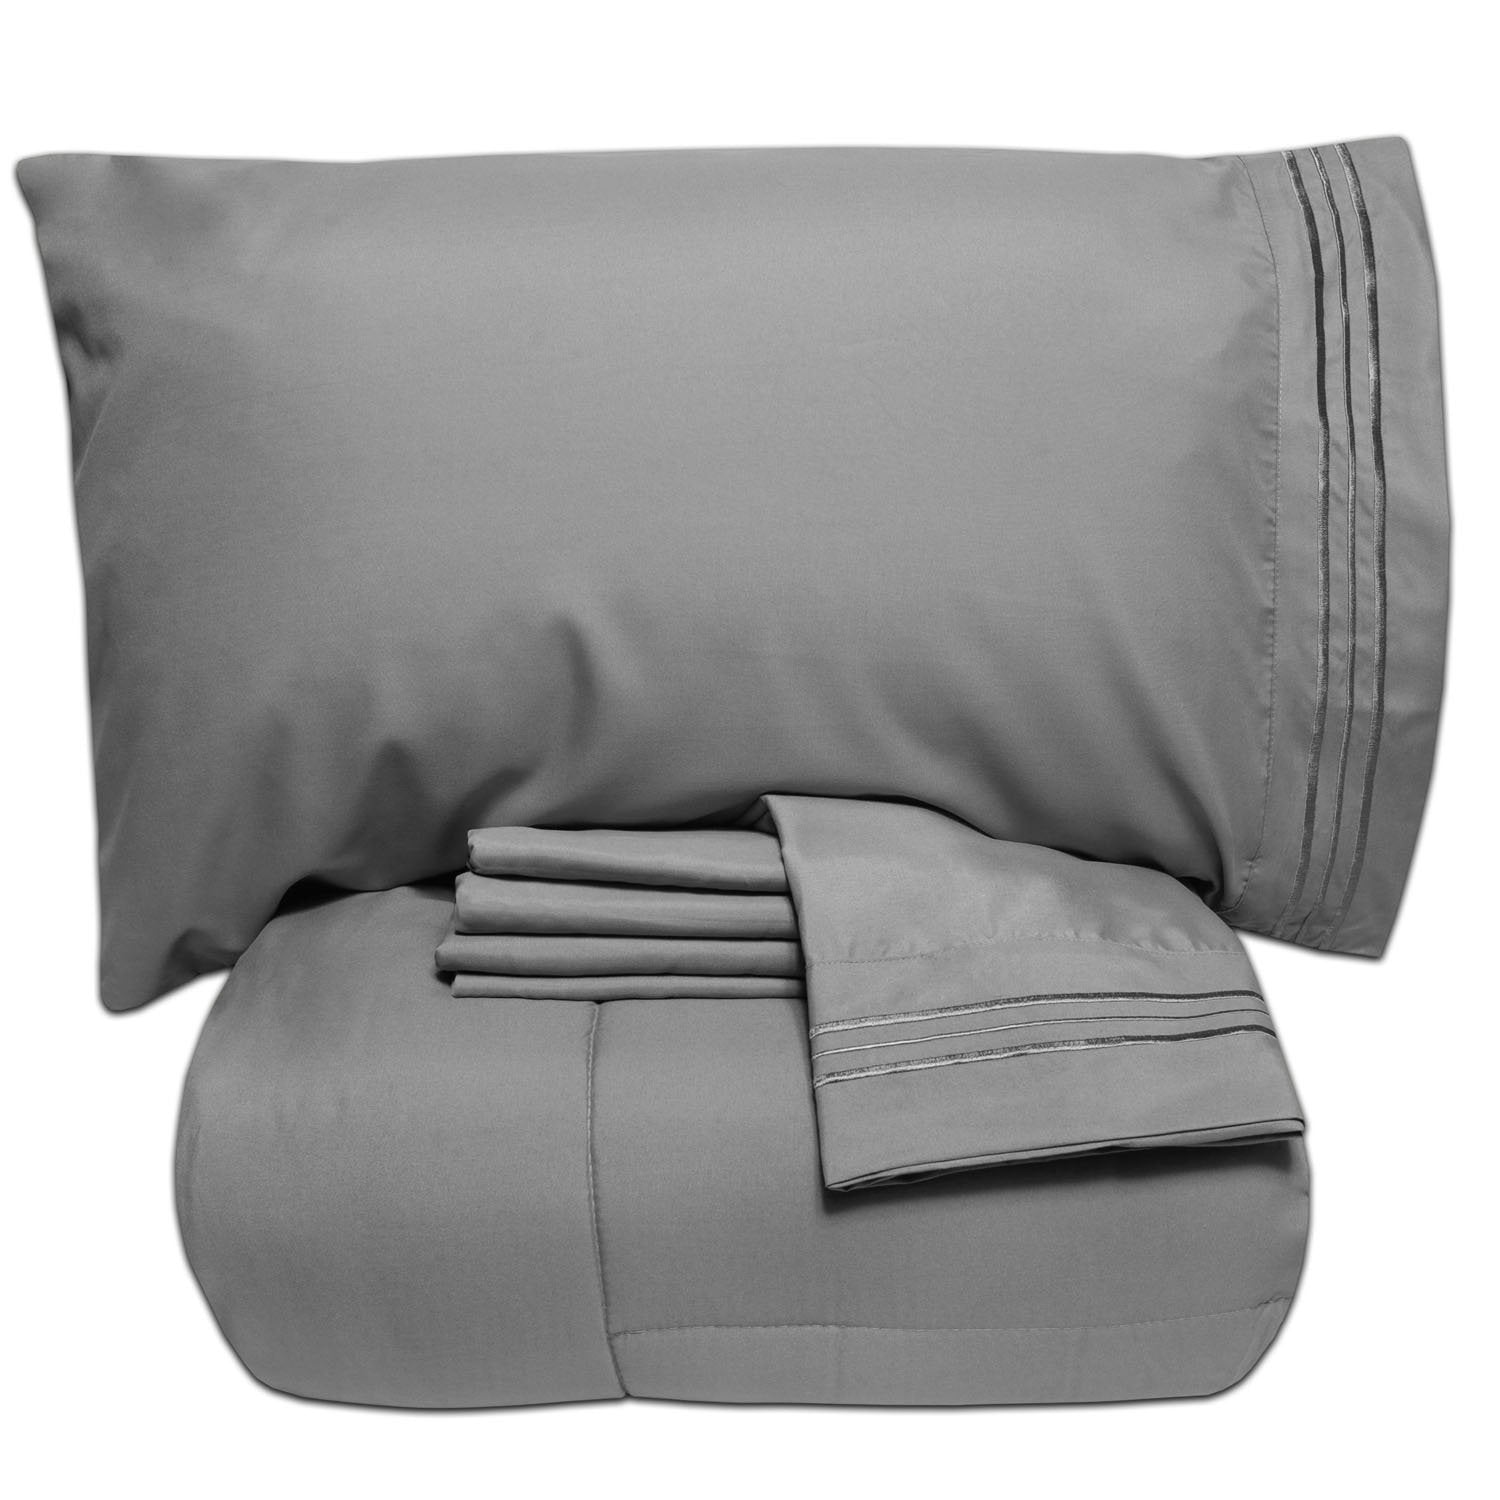 Basic 5-Piece Bed in a Bag  Set Gray - Folded